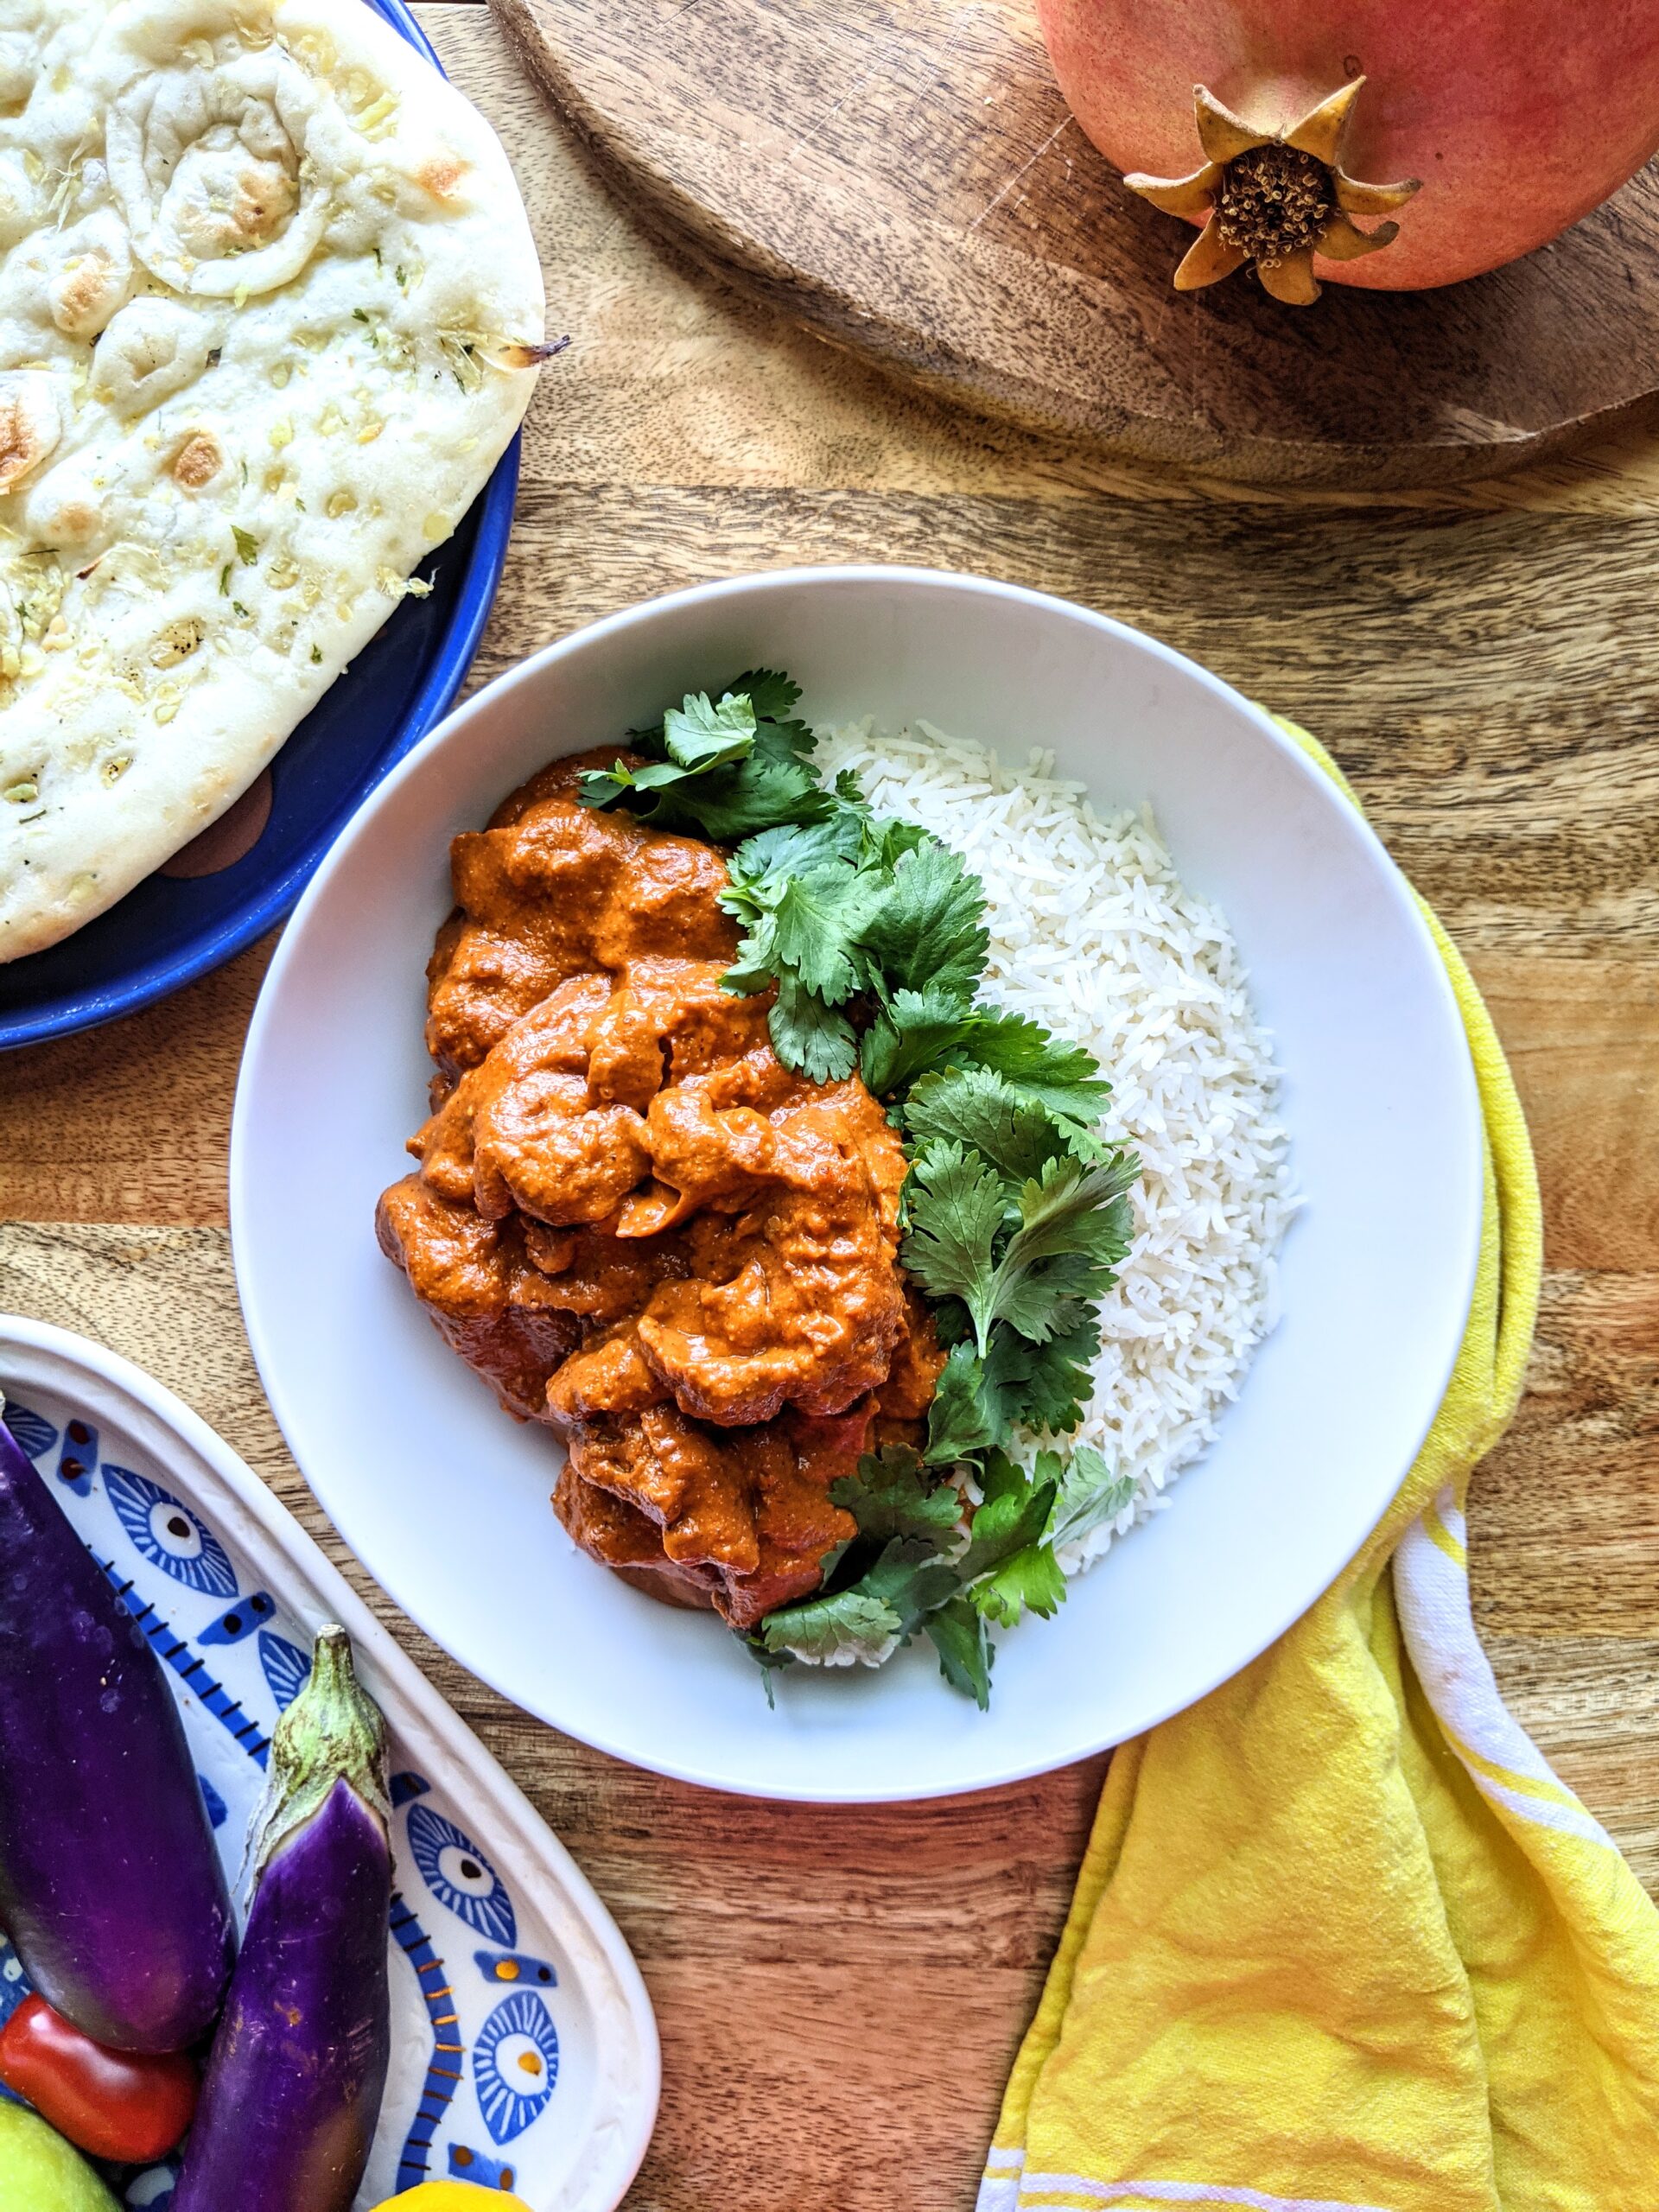 A bowl of rich tomato based butter chicken. Serve over basmati rice and alongside warm naan bread. Garnished with a generous amount of fresh cilantro.